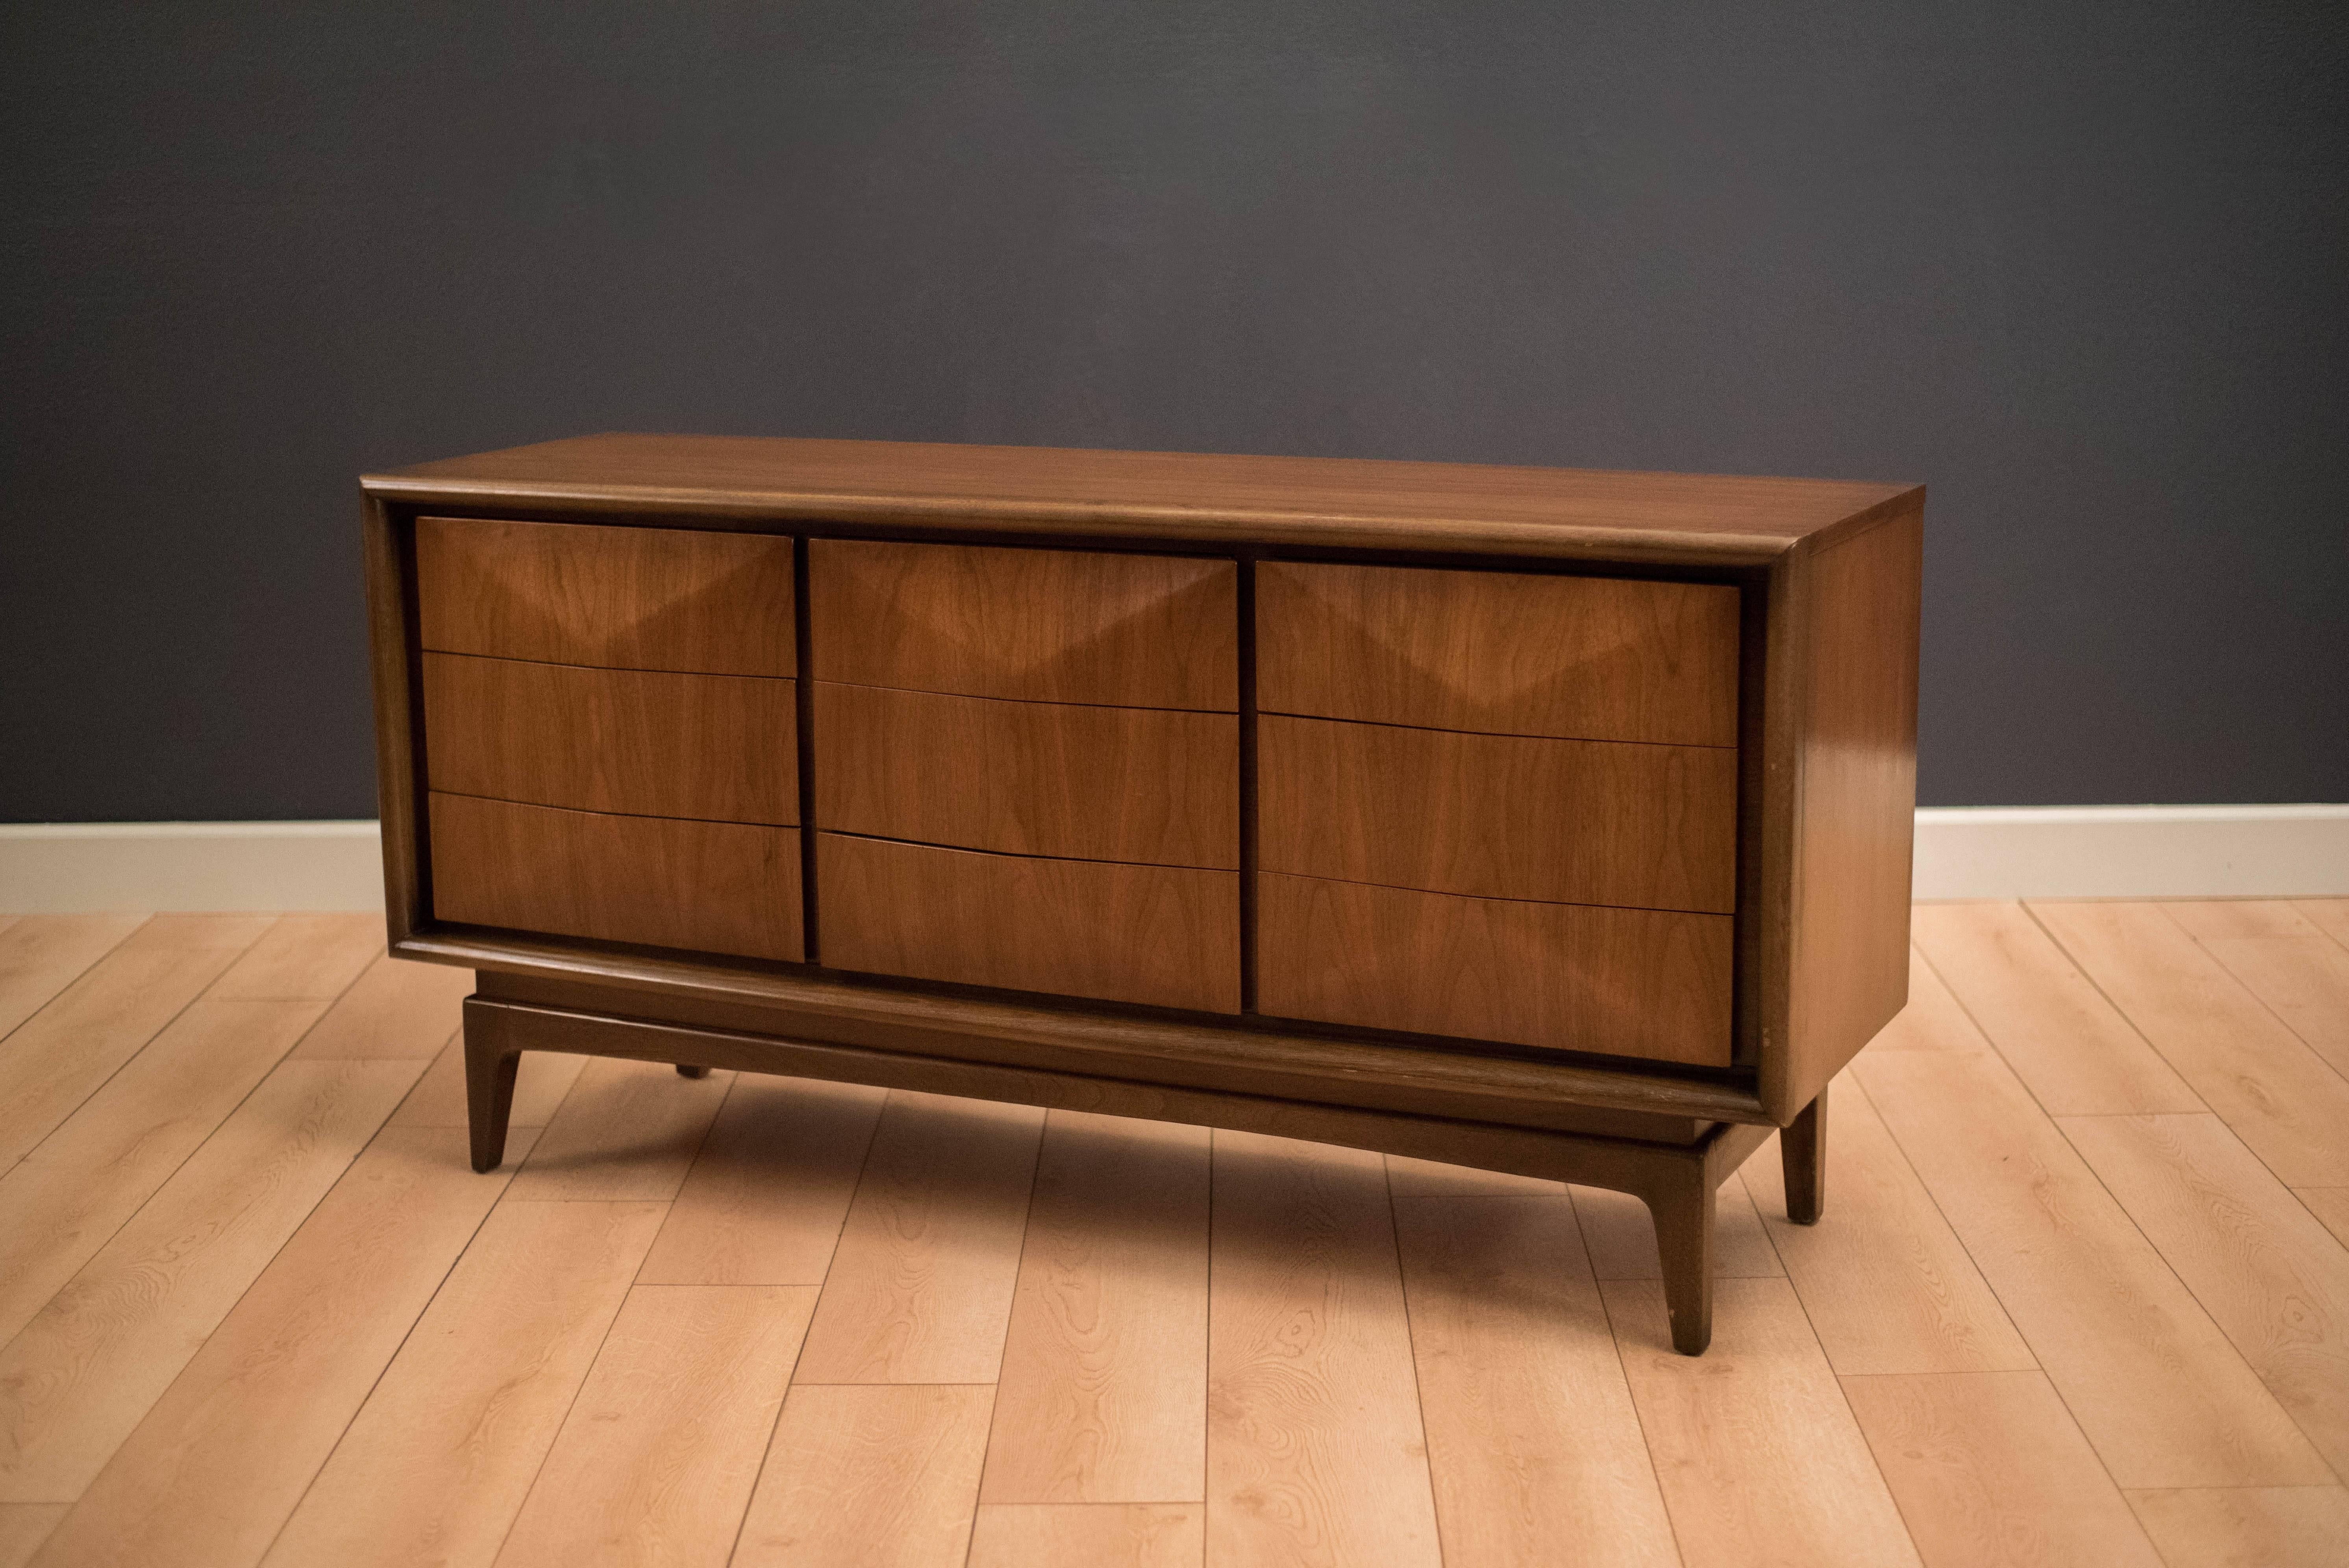 Vintage triple dresser manufactured by United Furniture in walnut, circa 1960s. This piece features nine diamond front drawers that offer plenty of storage space.